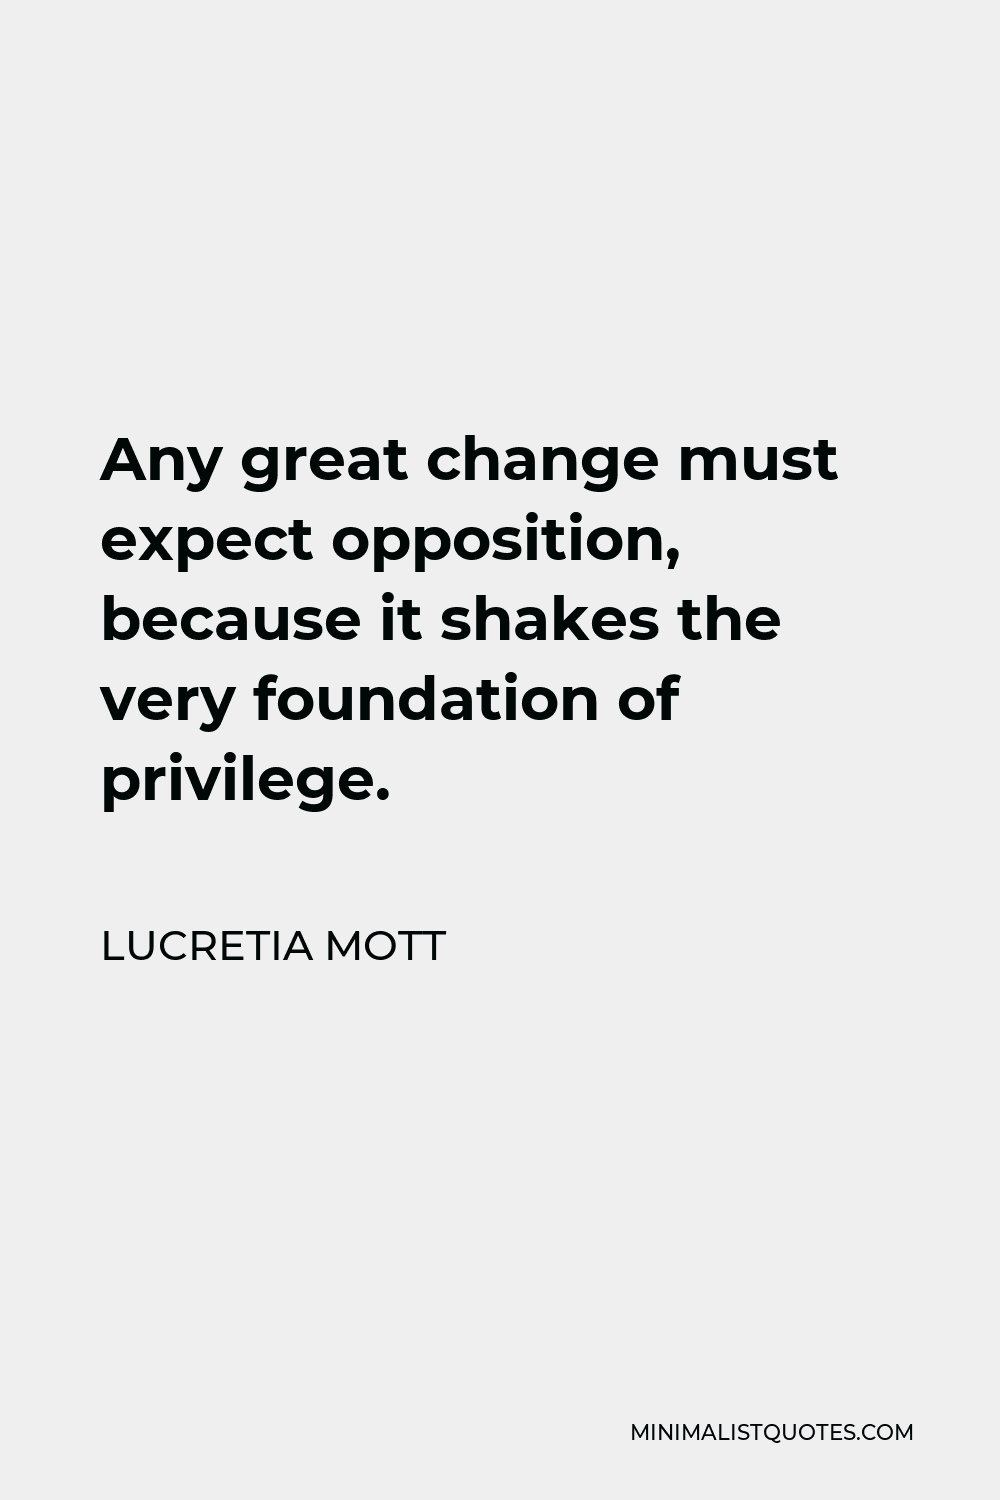 Lucretia Mott Quote - Any great change must expect opposition, because it shakes the very foundation of privilege.